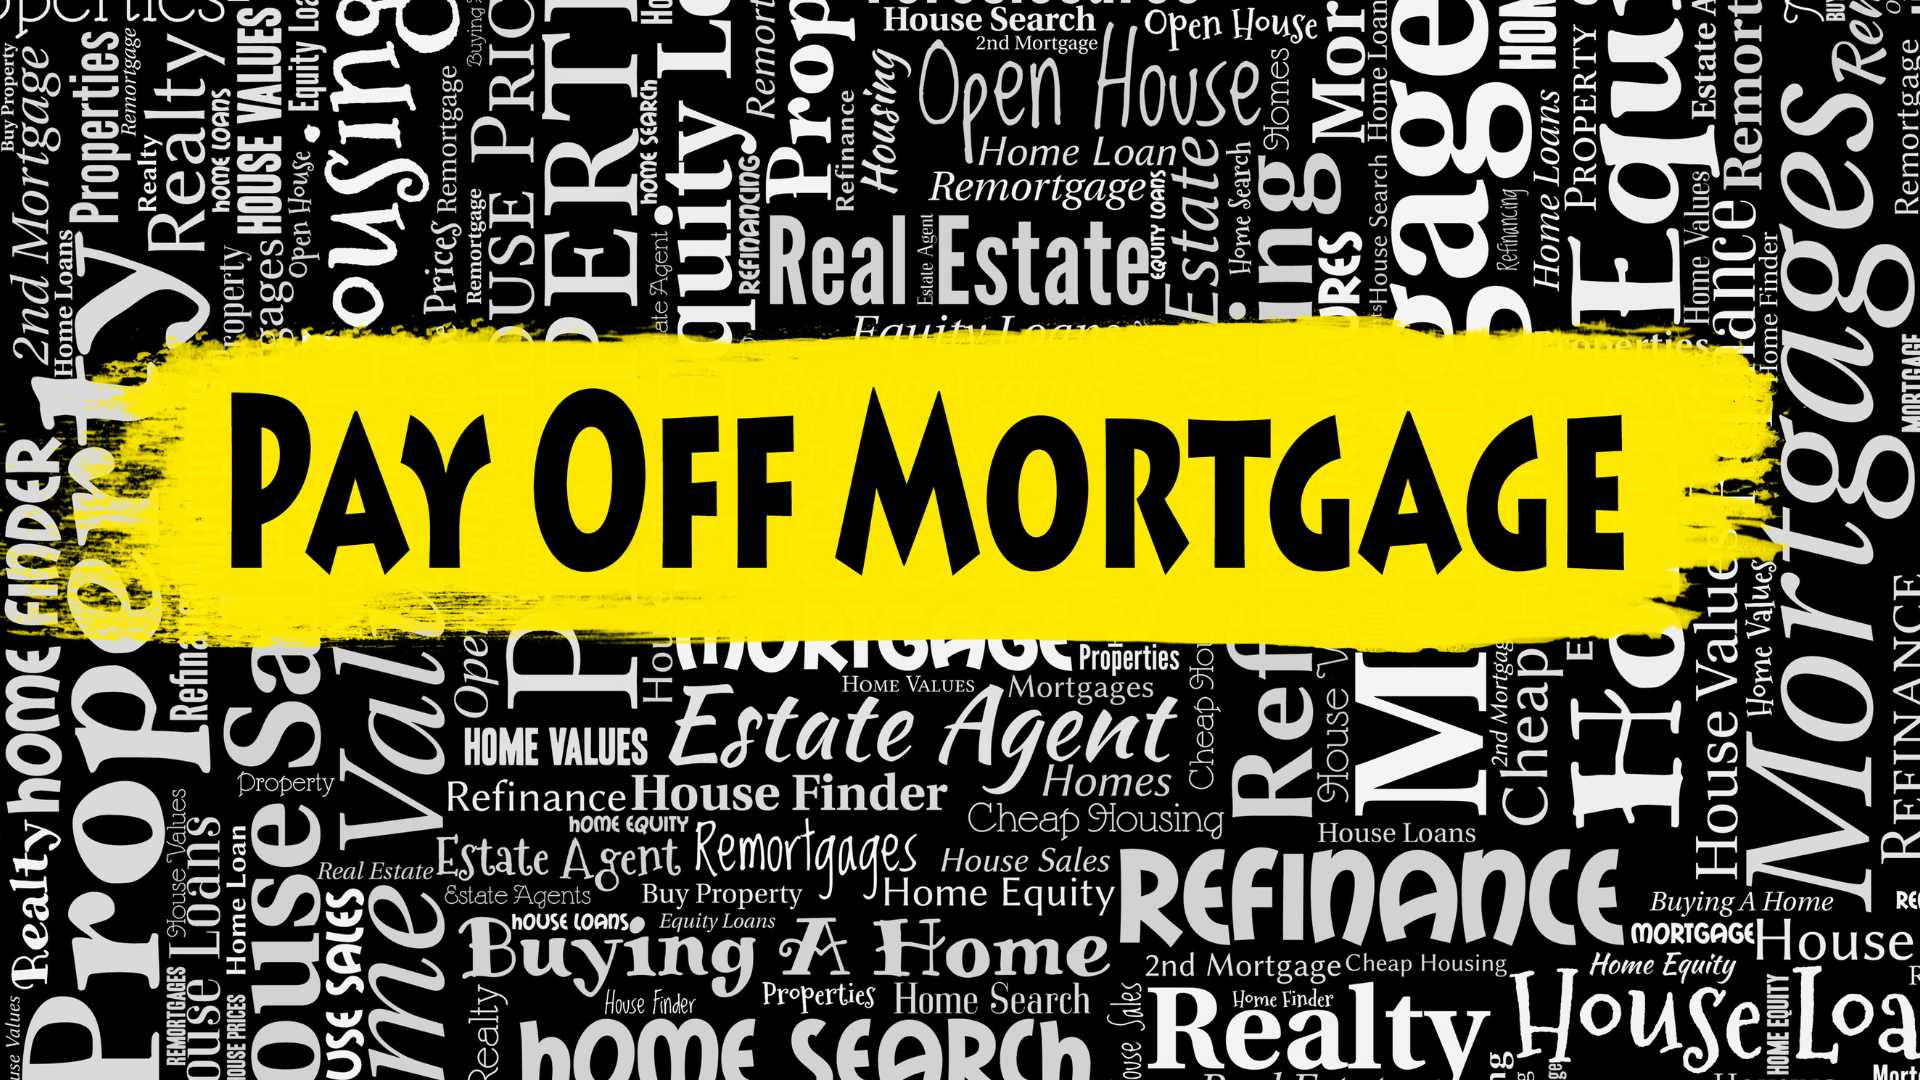 paying off mortgage early - pros and cons